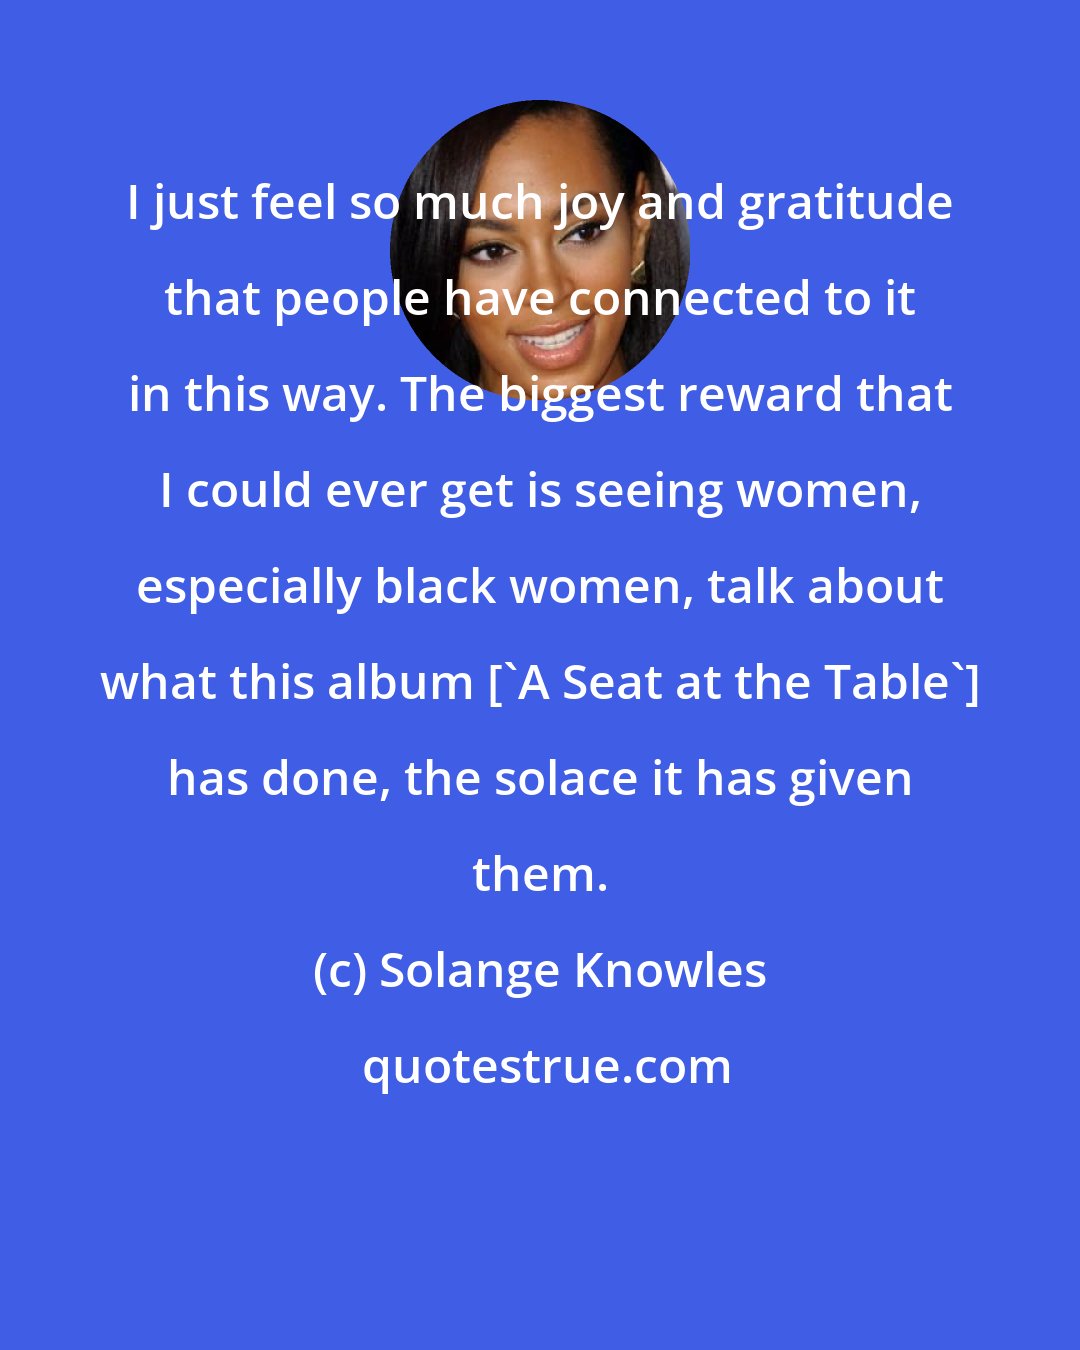 Solange Knowles: I just feel so much joy and gratitude that people have connected to it in this way. The biggest reward that I could ever get is seeing women, especially black women, talk about what this album ['A Seat at the Table'] has done, the solace it has given them.